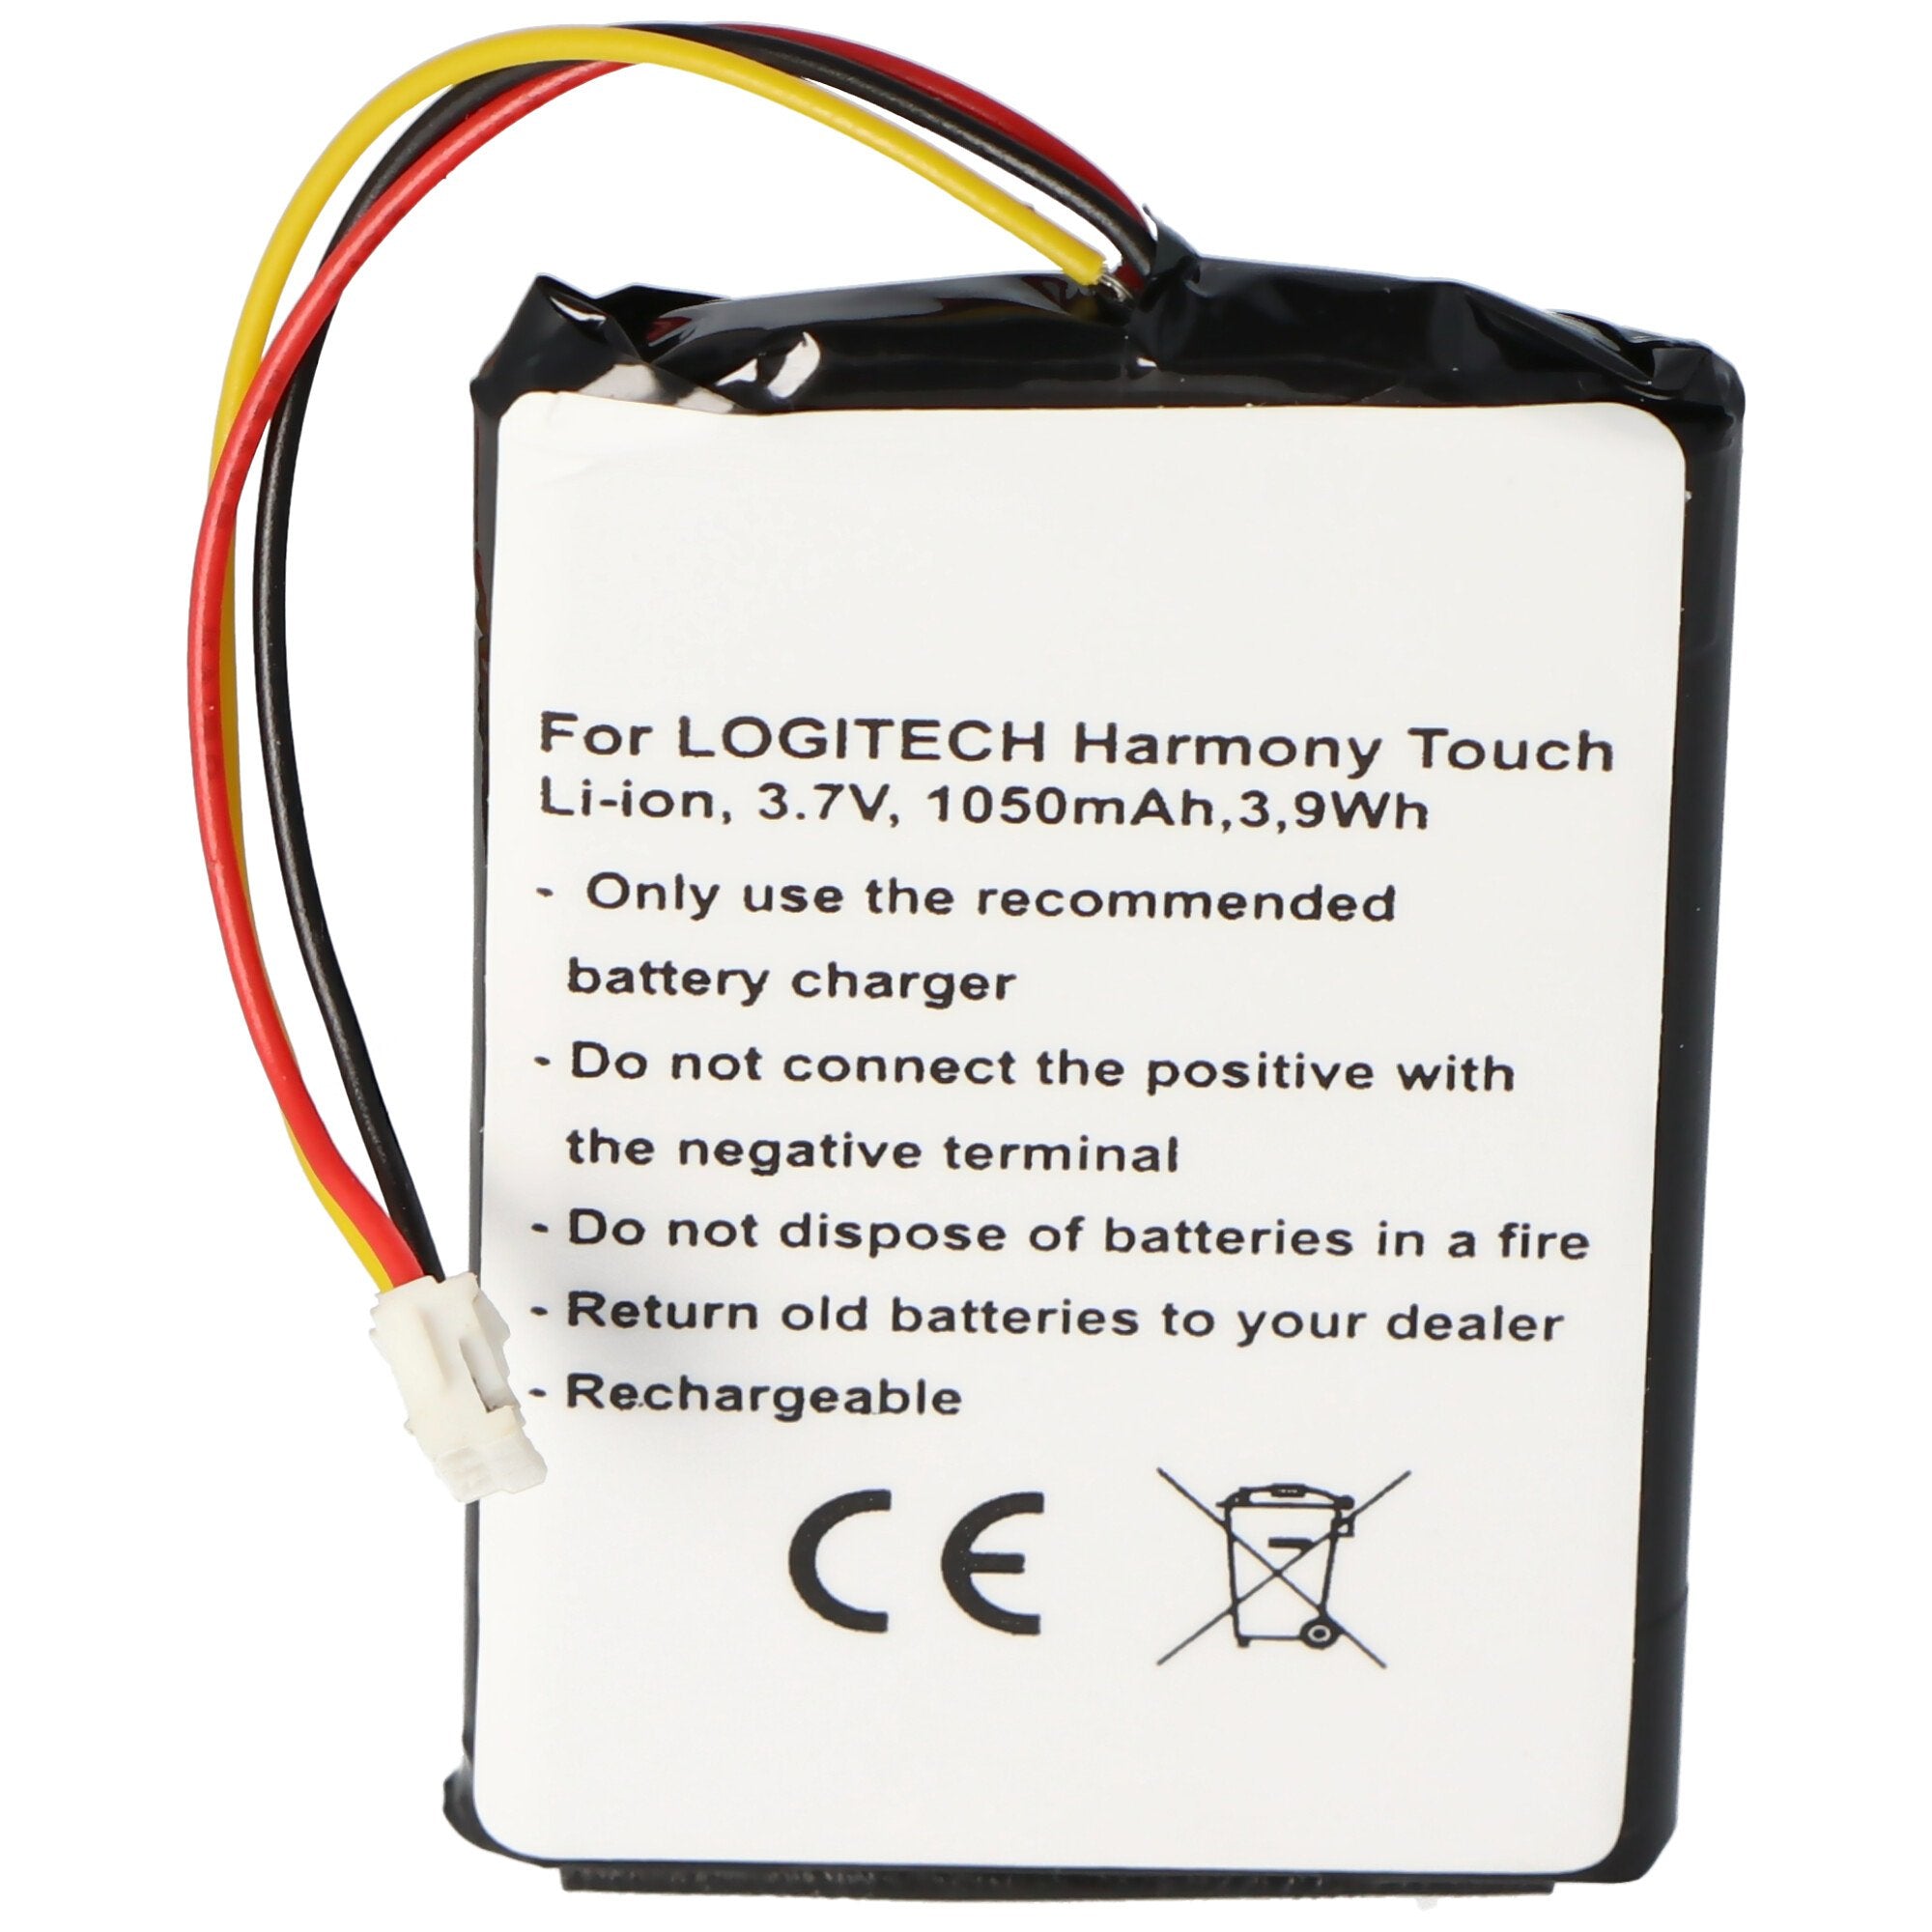 Battery suitable for the Logitech 915-000198, Harmony Touch, Harmony Ultimate battery